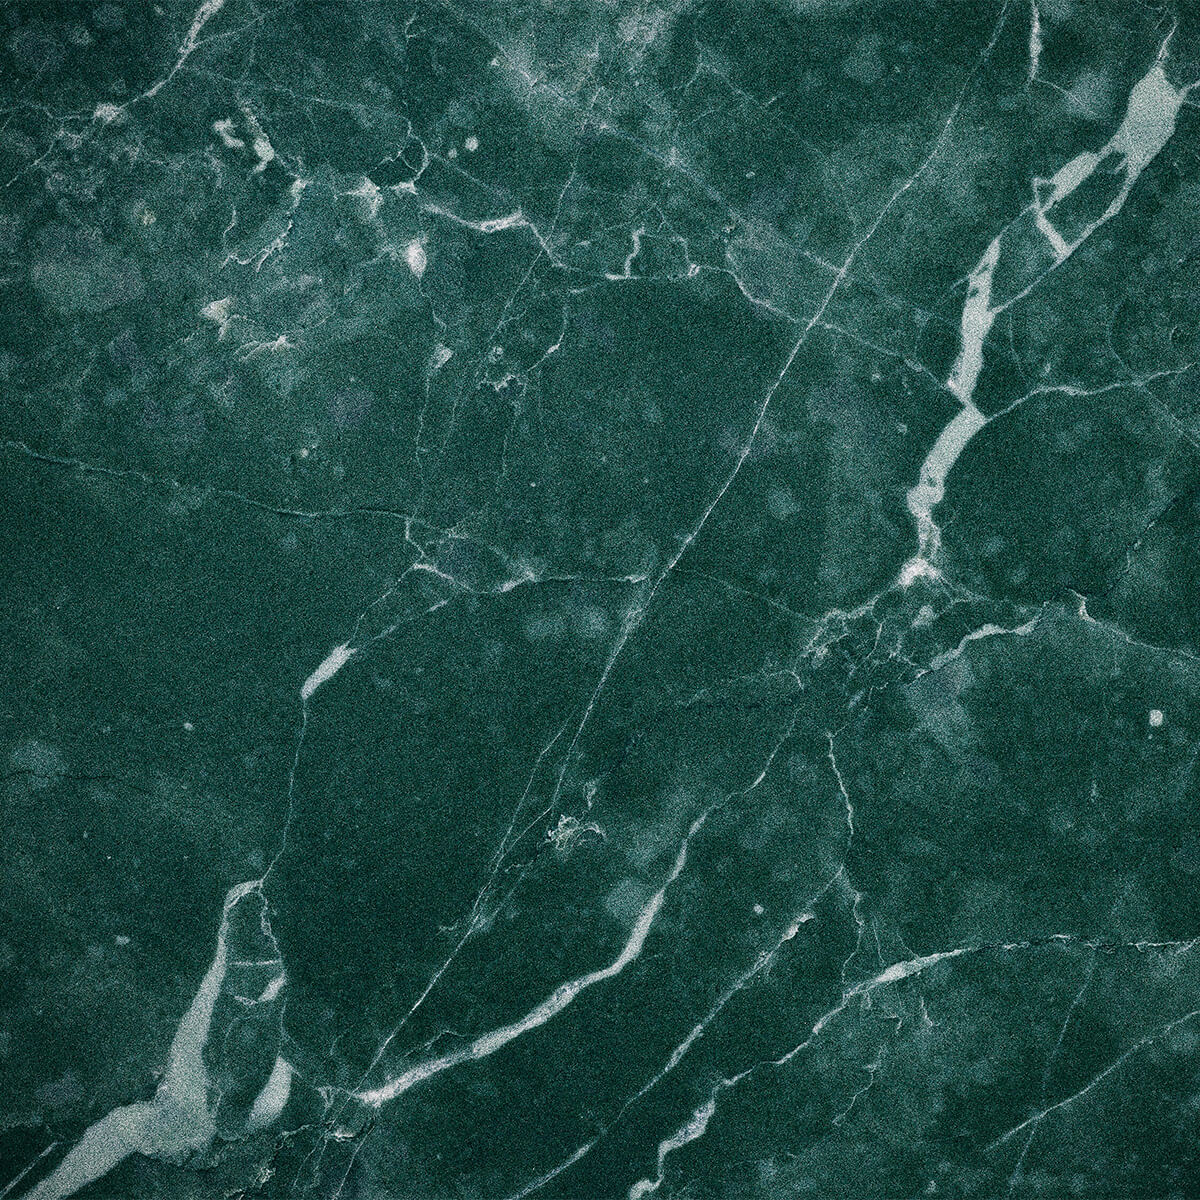 Green Marble Texture